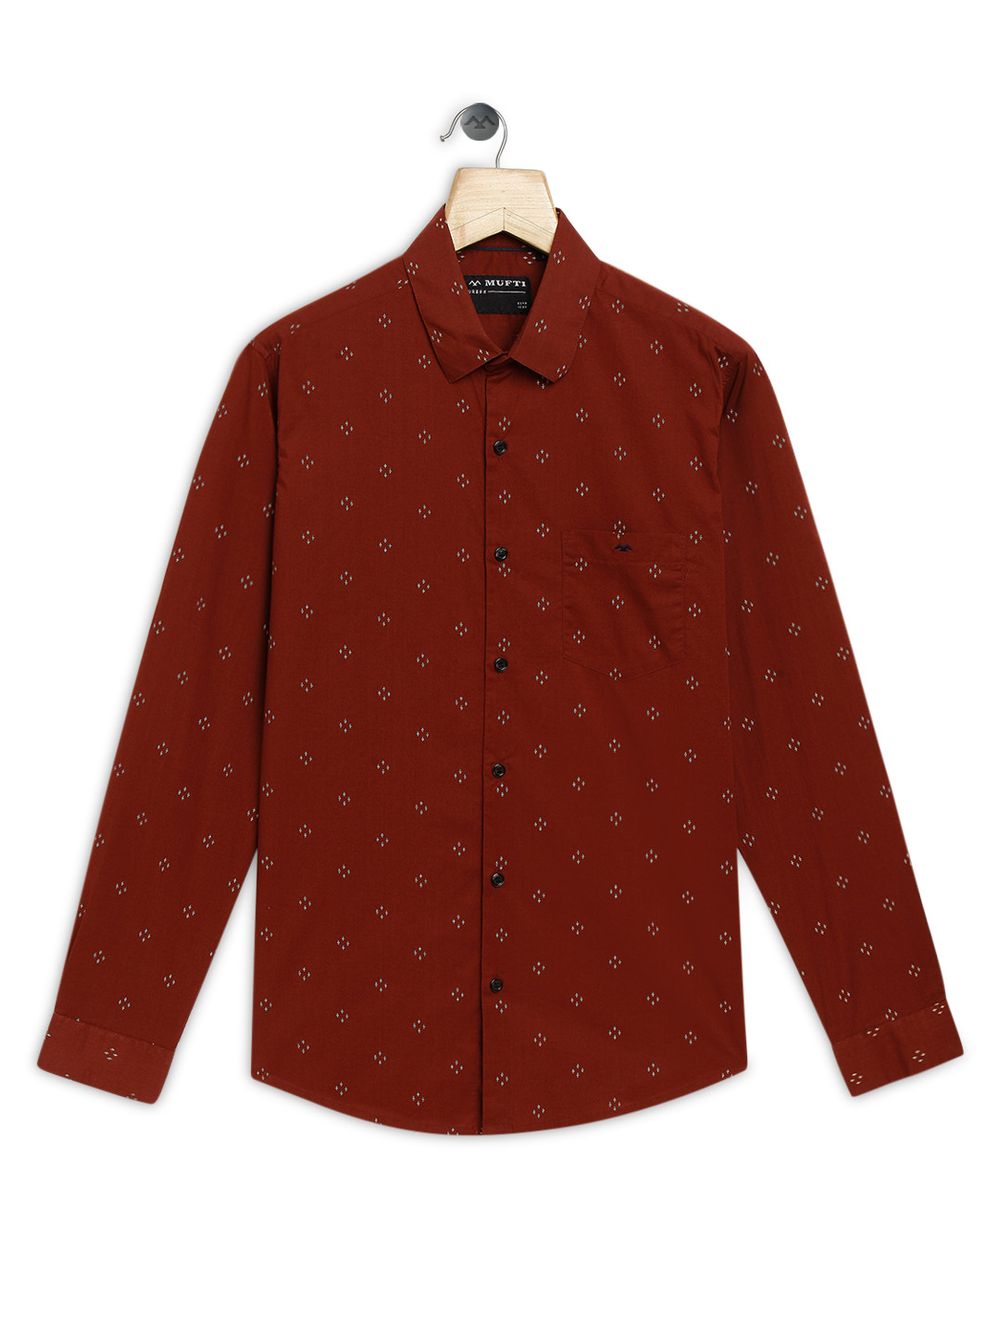 Maroon & Off White Print Slim Fit Casual Shirt